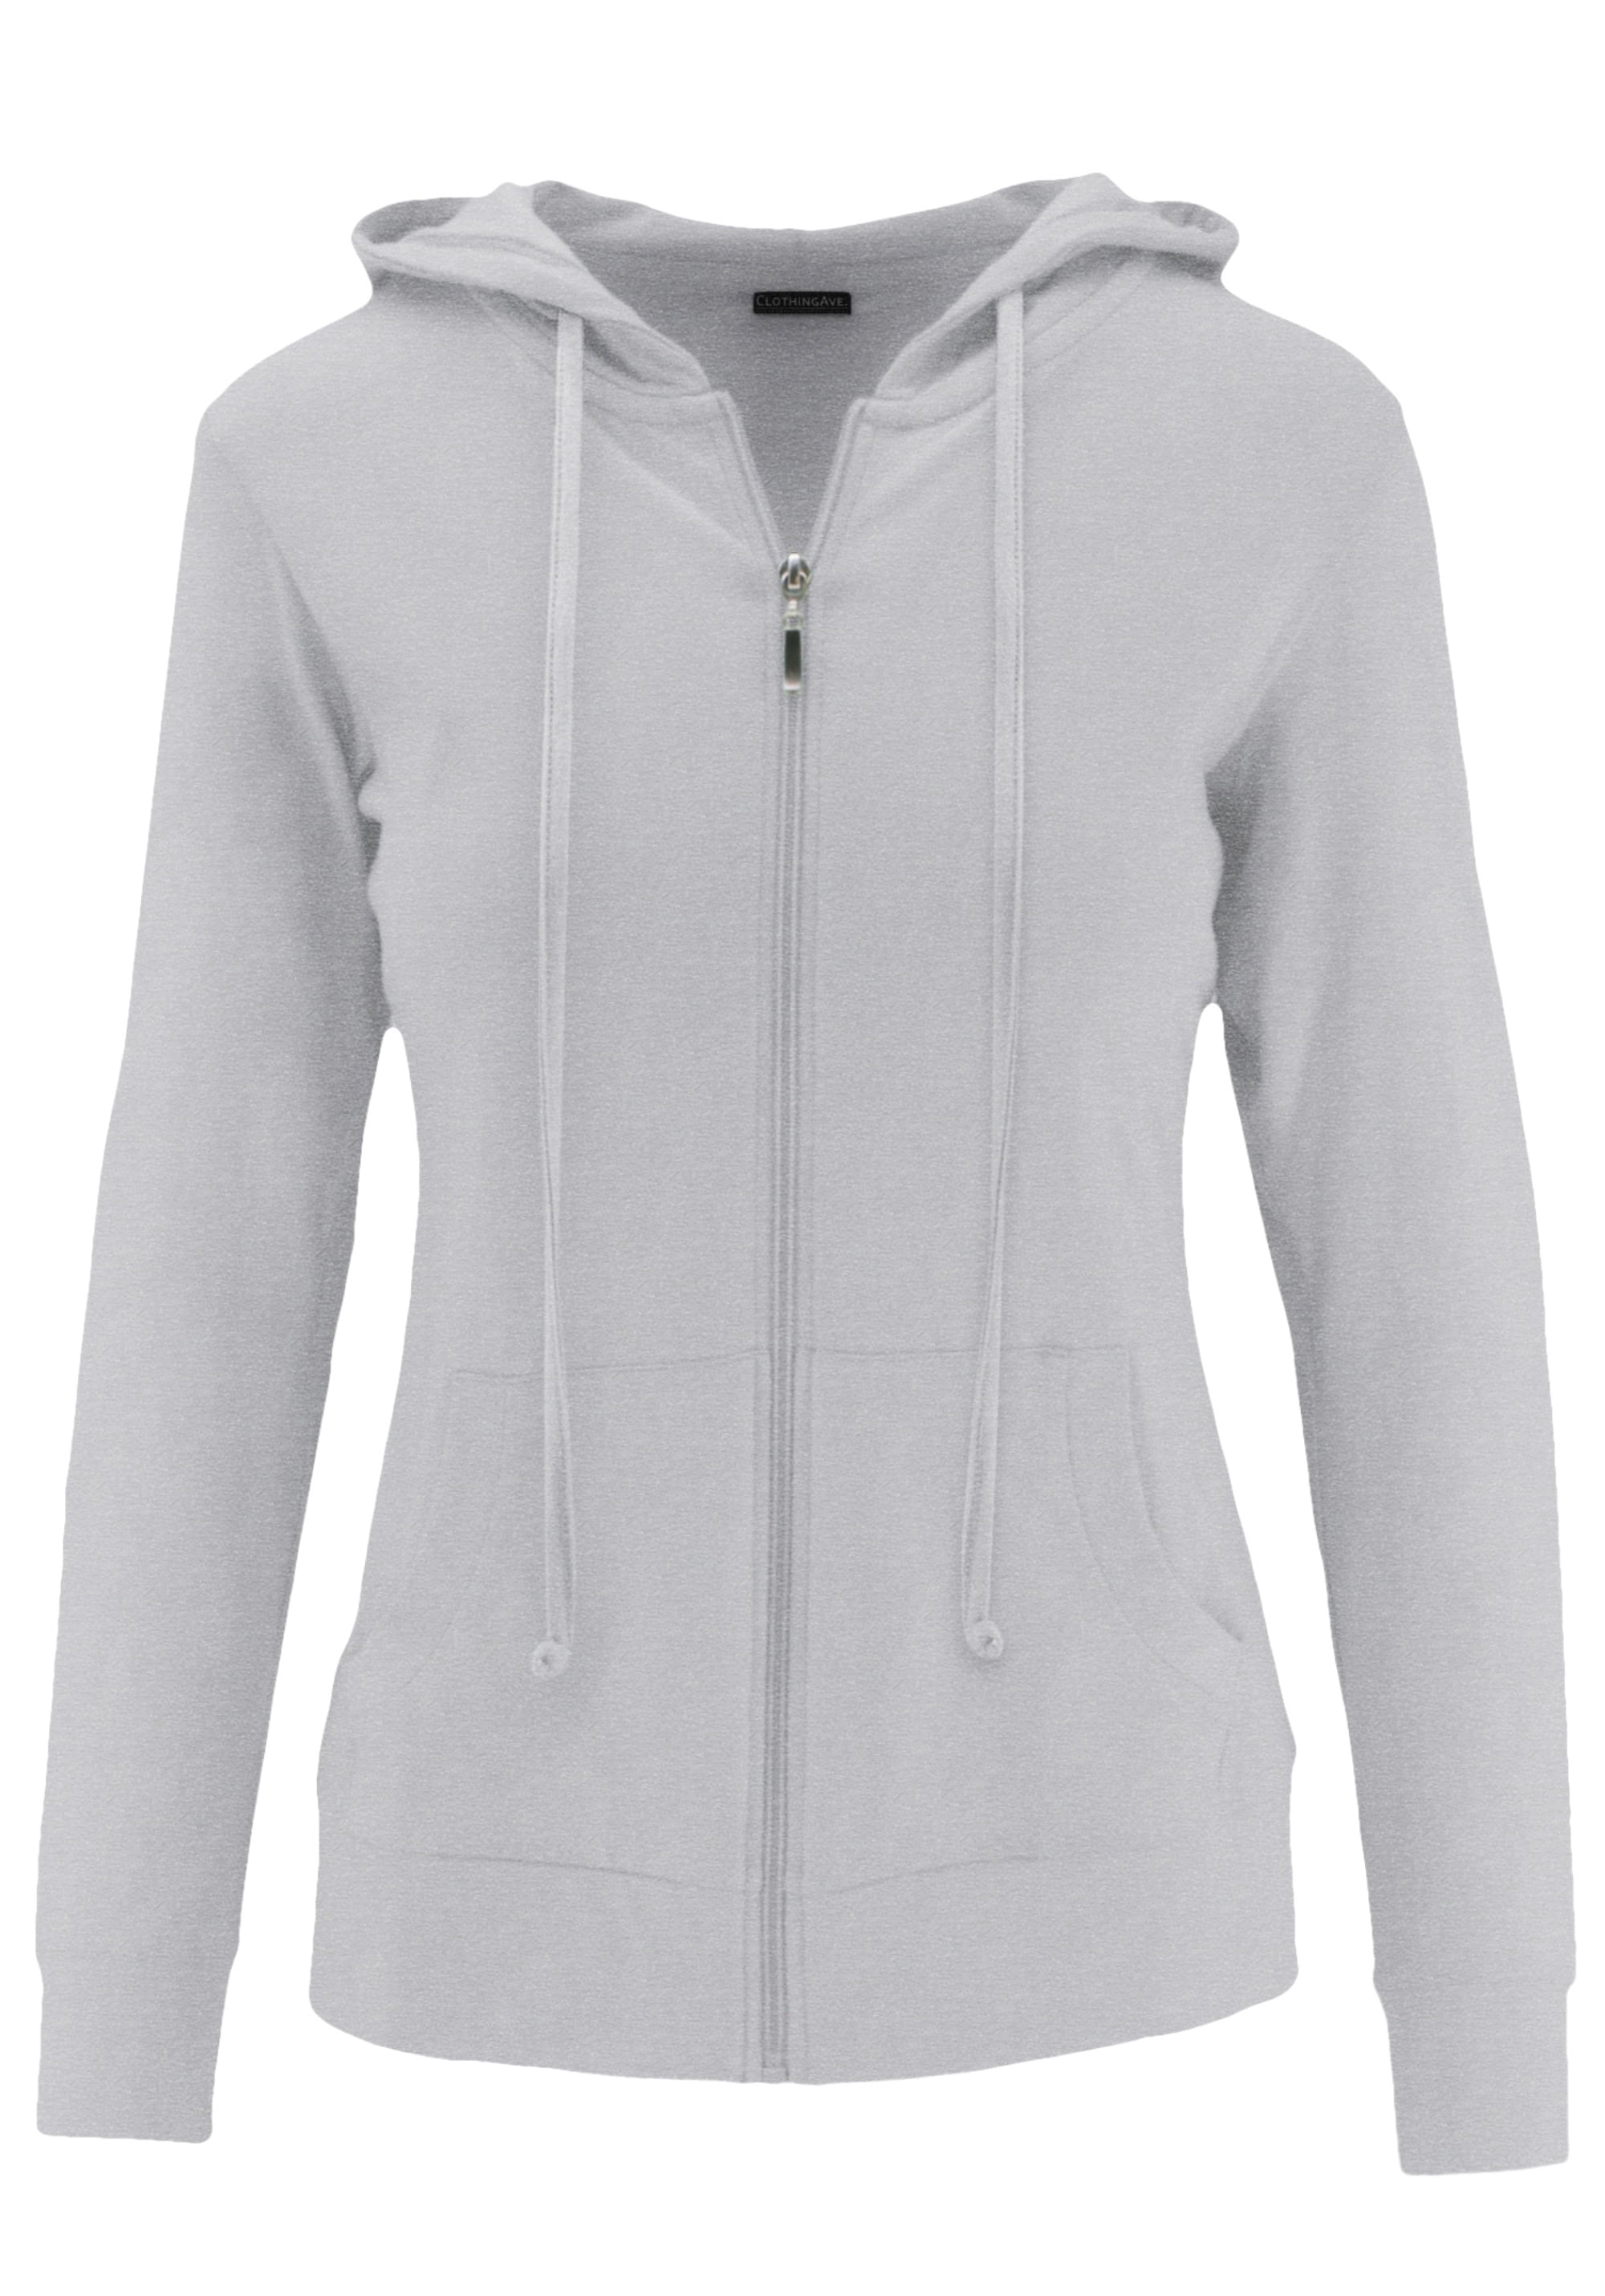 ClothingAve. Women's Lightweight Comfy Zip-Up Hoodie | Active, Casual ...